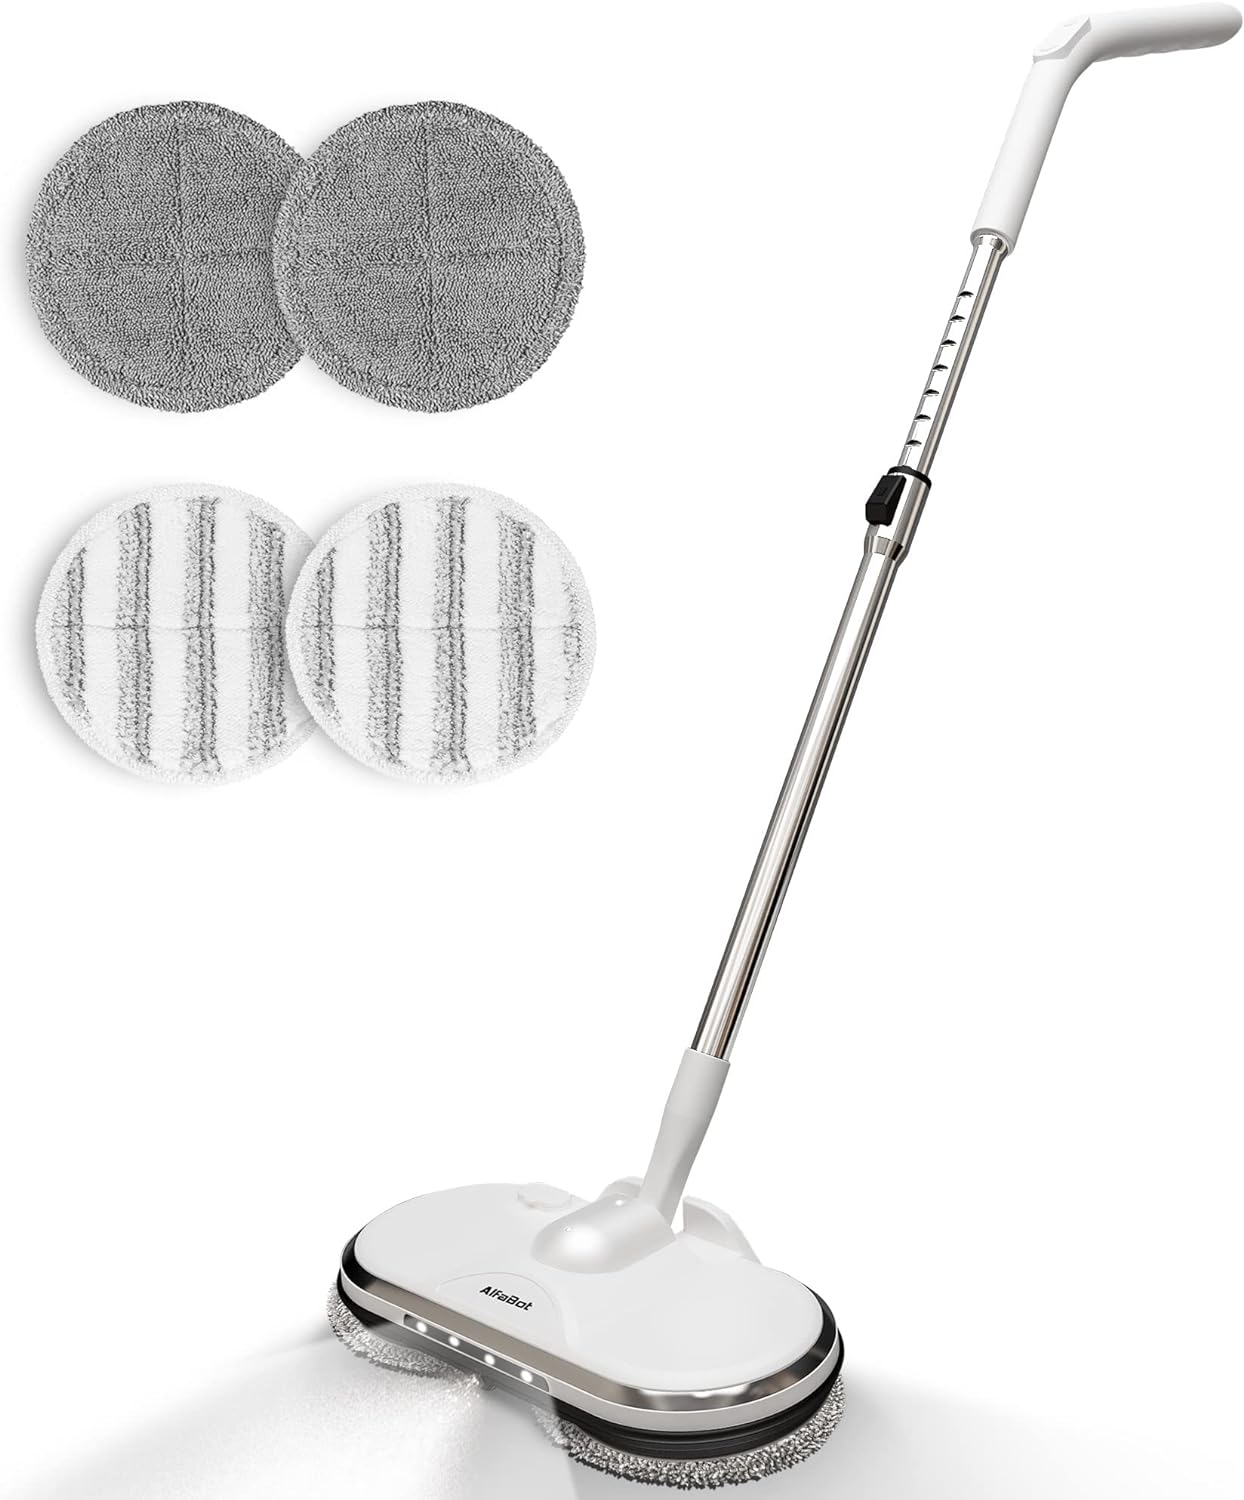 AlfaBot Cordless Electric Mop with Spray Function